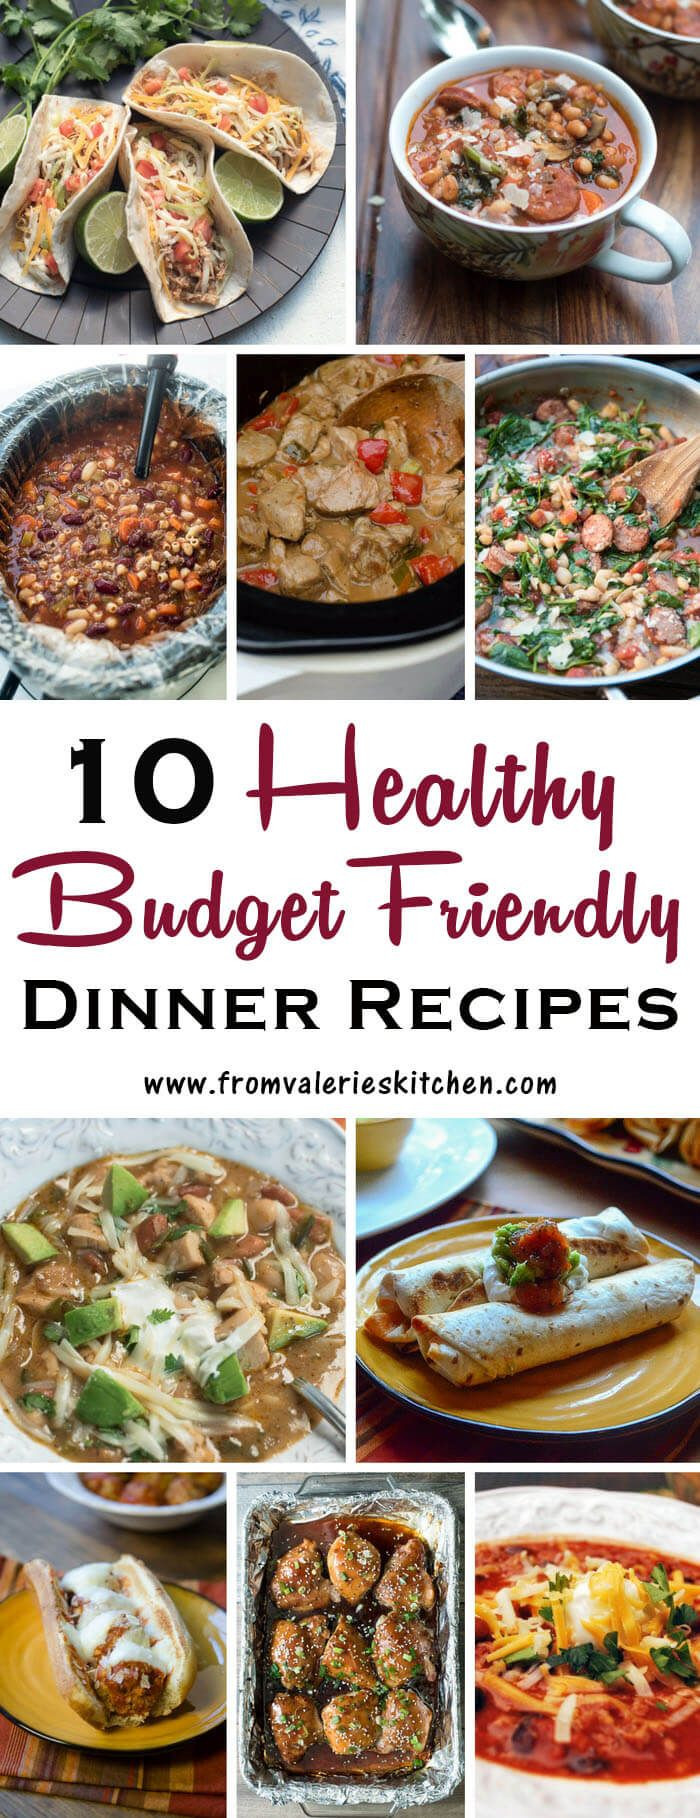 Cheap Healthy Dinners For 4
 468 best From Valerie s Kitchen images on Pinterest